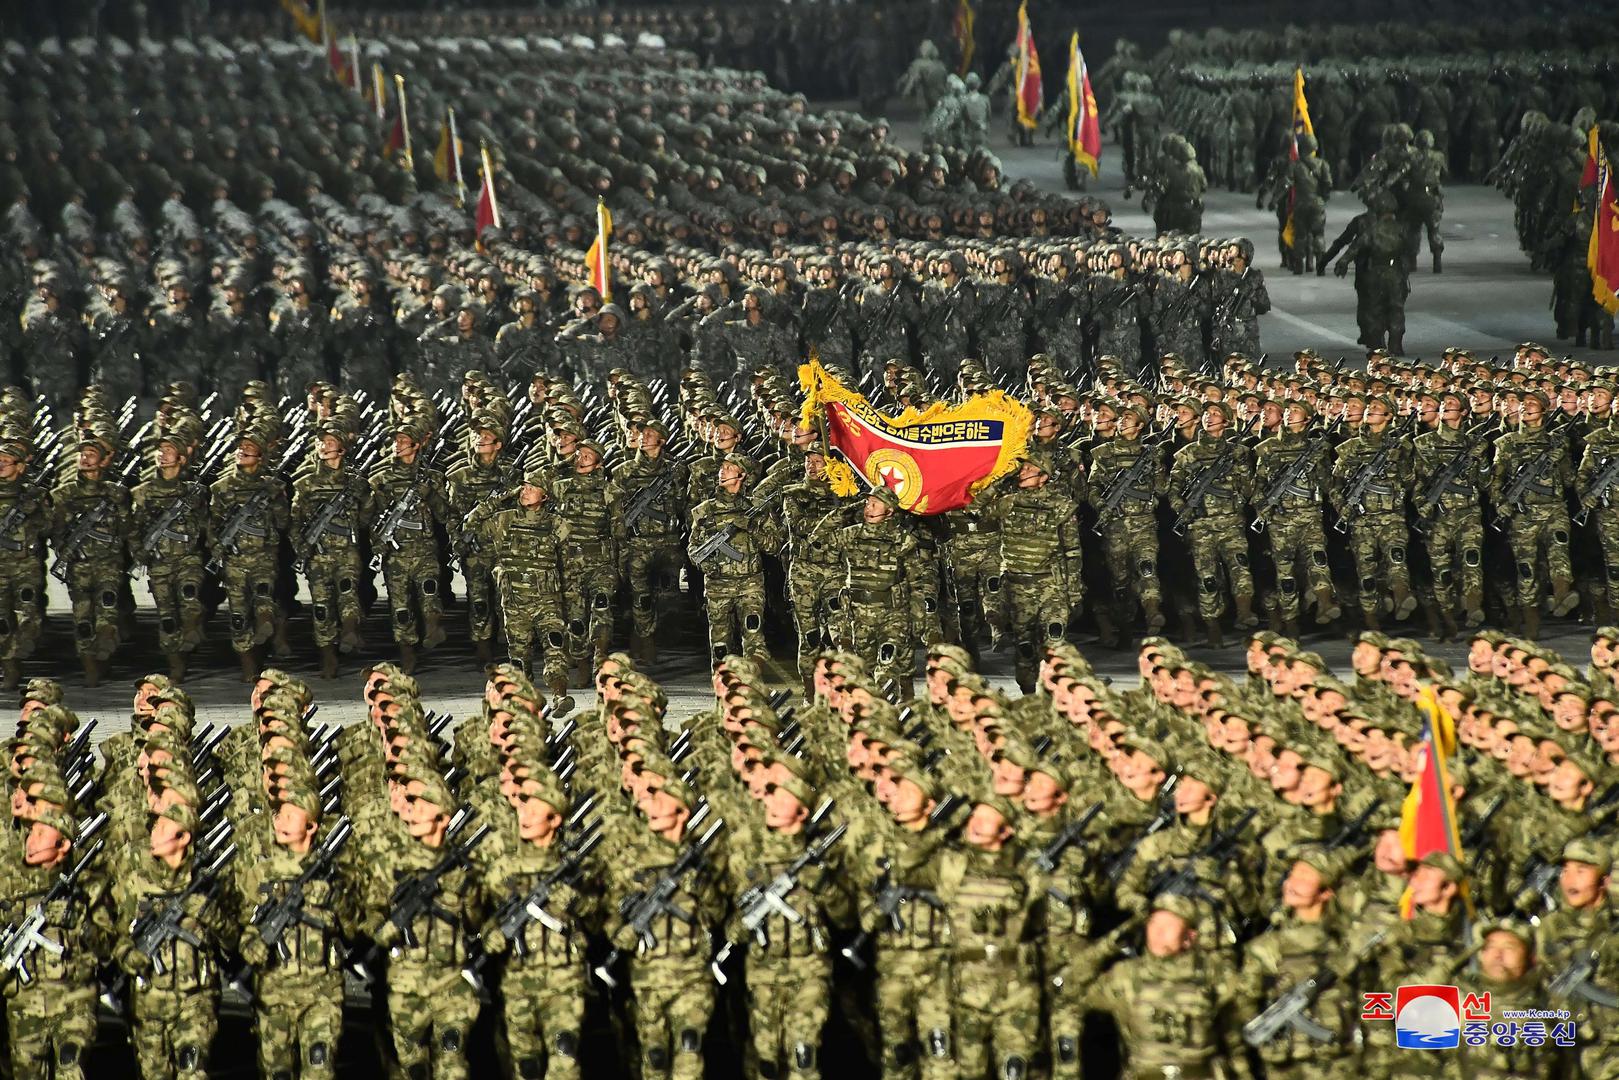 8th Congress of the Workers' Party in Pyongyang Troops march during a military parade to commemorate the 8th Congress of the Workers' Party in Pyongyang, North Korea January 14, 2021 in this photo supplied by North Korea's Central News Agency (KCNA).    KCNA via REUTERS    ATTENTION EDITORS - THIS IMAGE WAS PROVIDED BY A THIRD PARTY. REUTERS IS UNABLE TO INDEPENDENTLY VERIFY THIS IMAGE. NO THIRD PARTY SALES. SOUTH KOREA OUT. NO COMMERCIAL OR EDITORIAL SALES IN SOUTH KOREA. KCNA